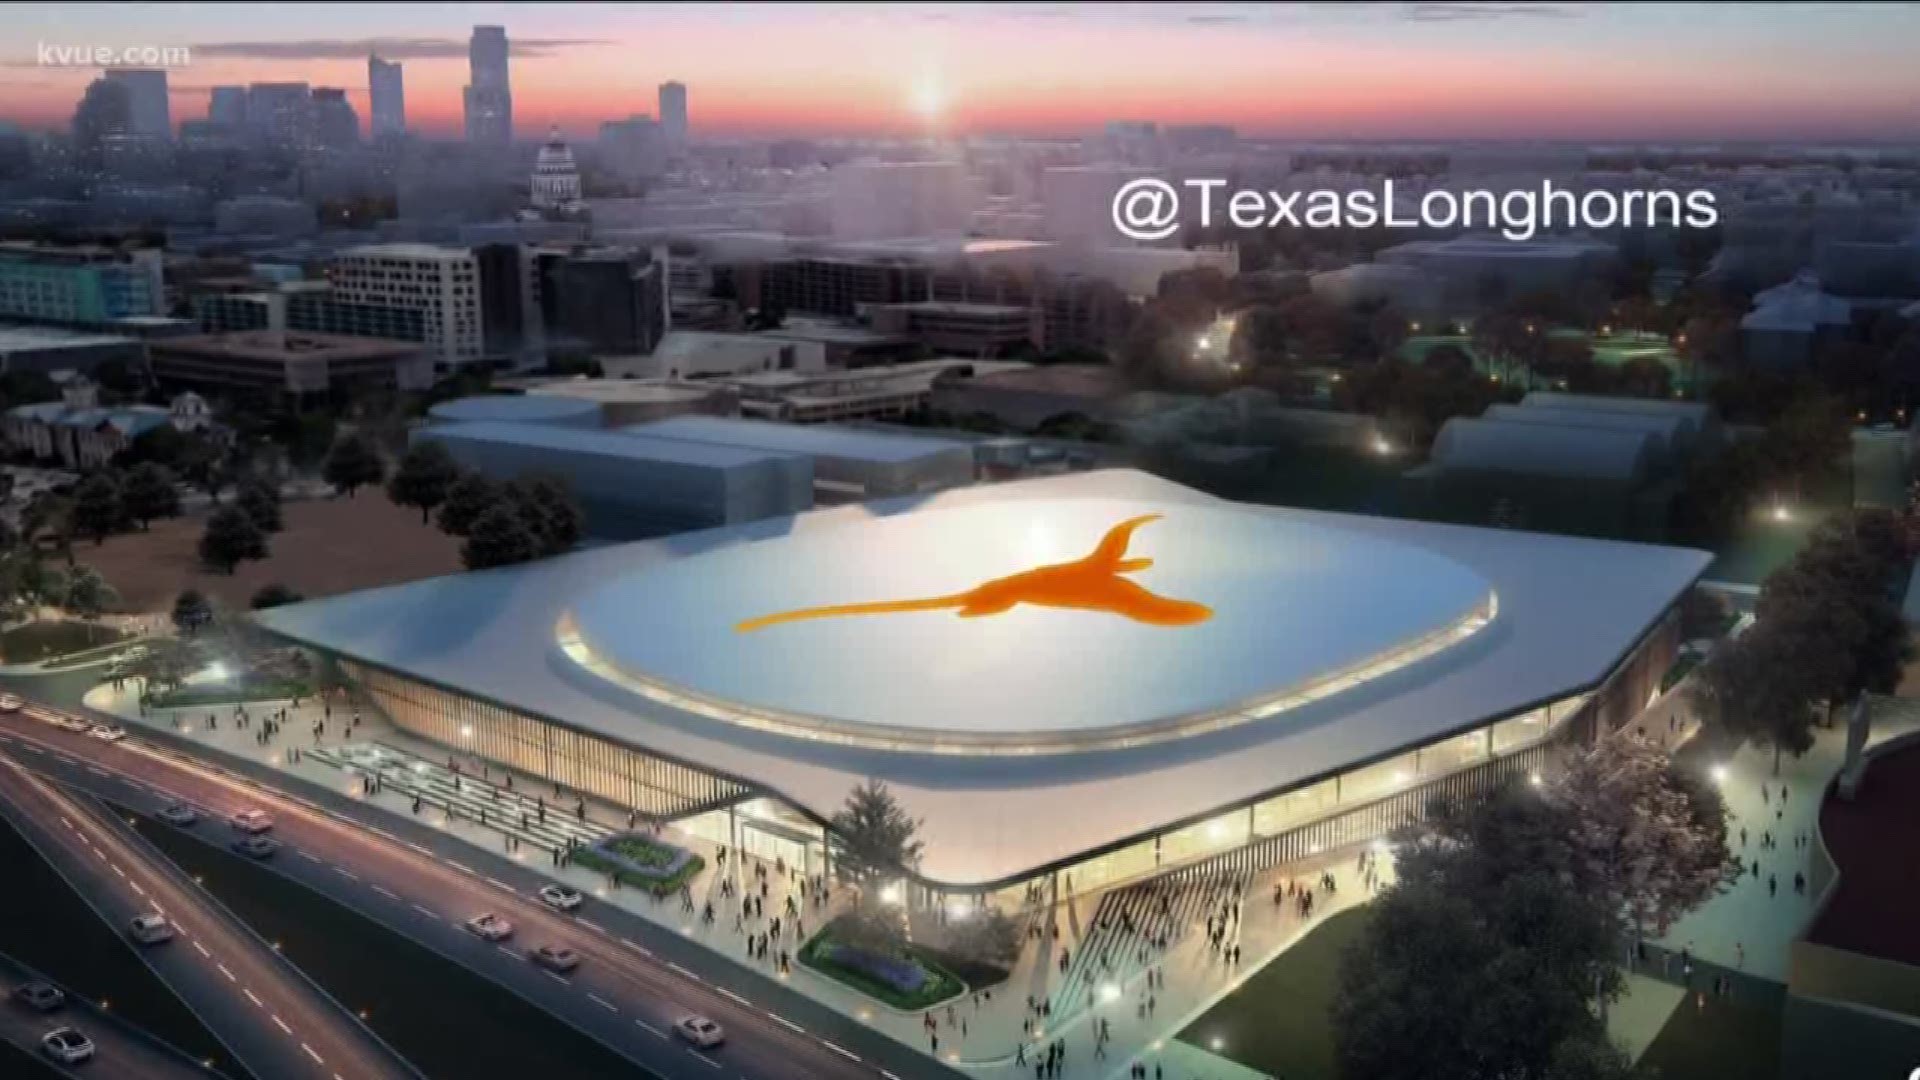 The arena will hold about 10,000 people for UT basketball games and 16,000 to 17,000 for other events, counting floor seats.